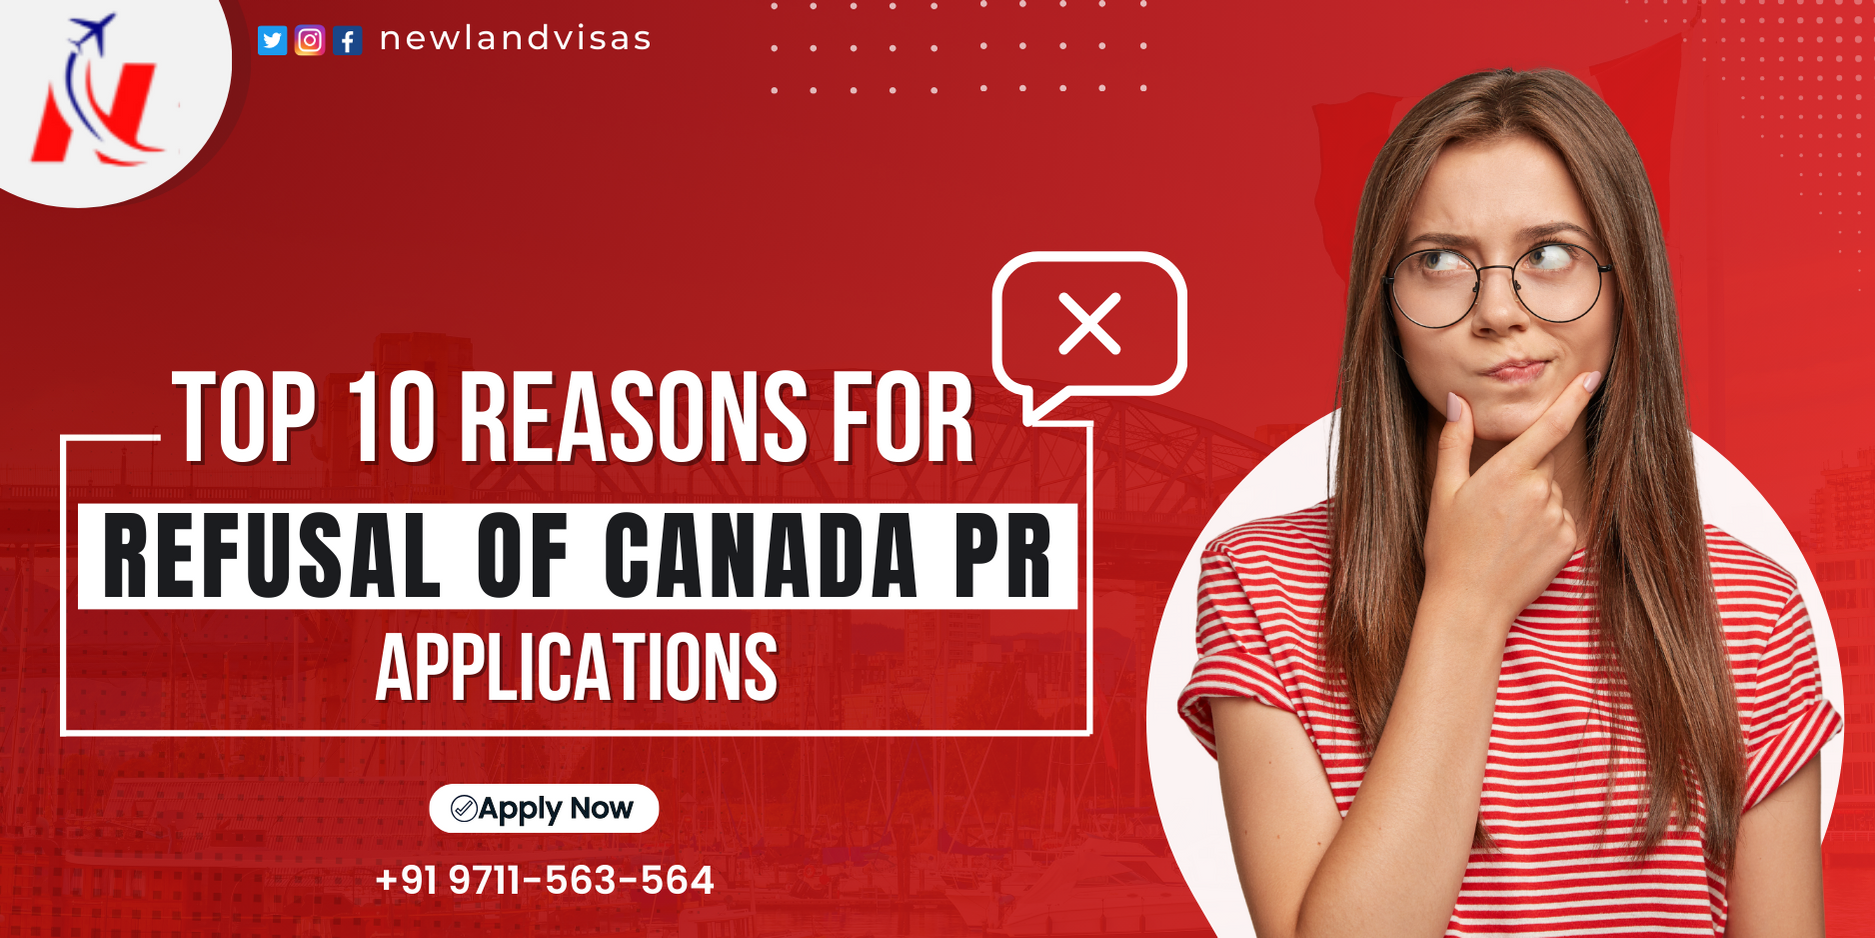 Top 10 Reasons for Refusal of Canada PR Applications